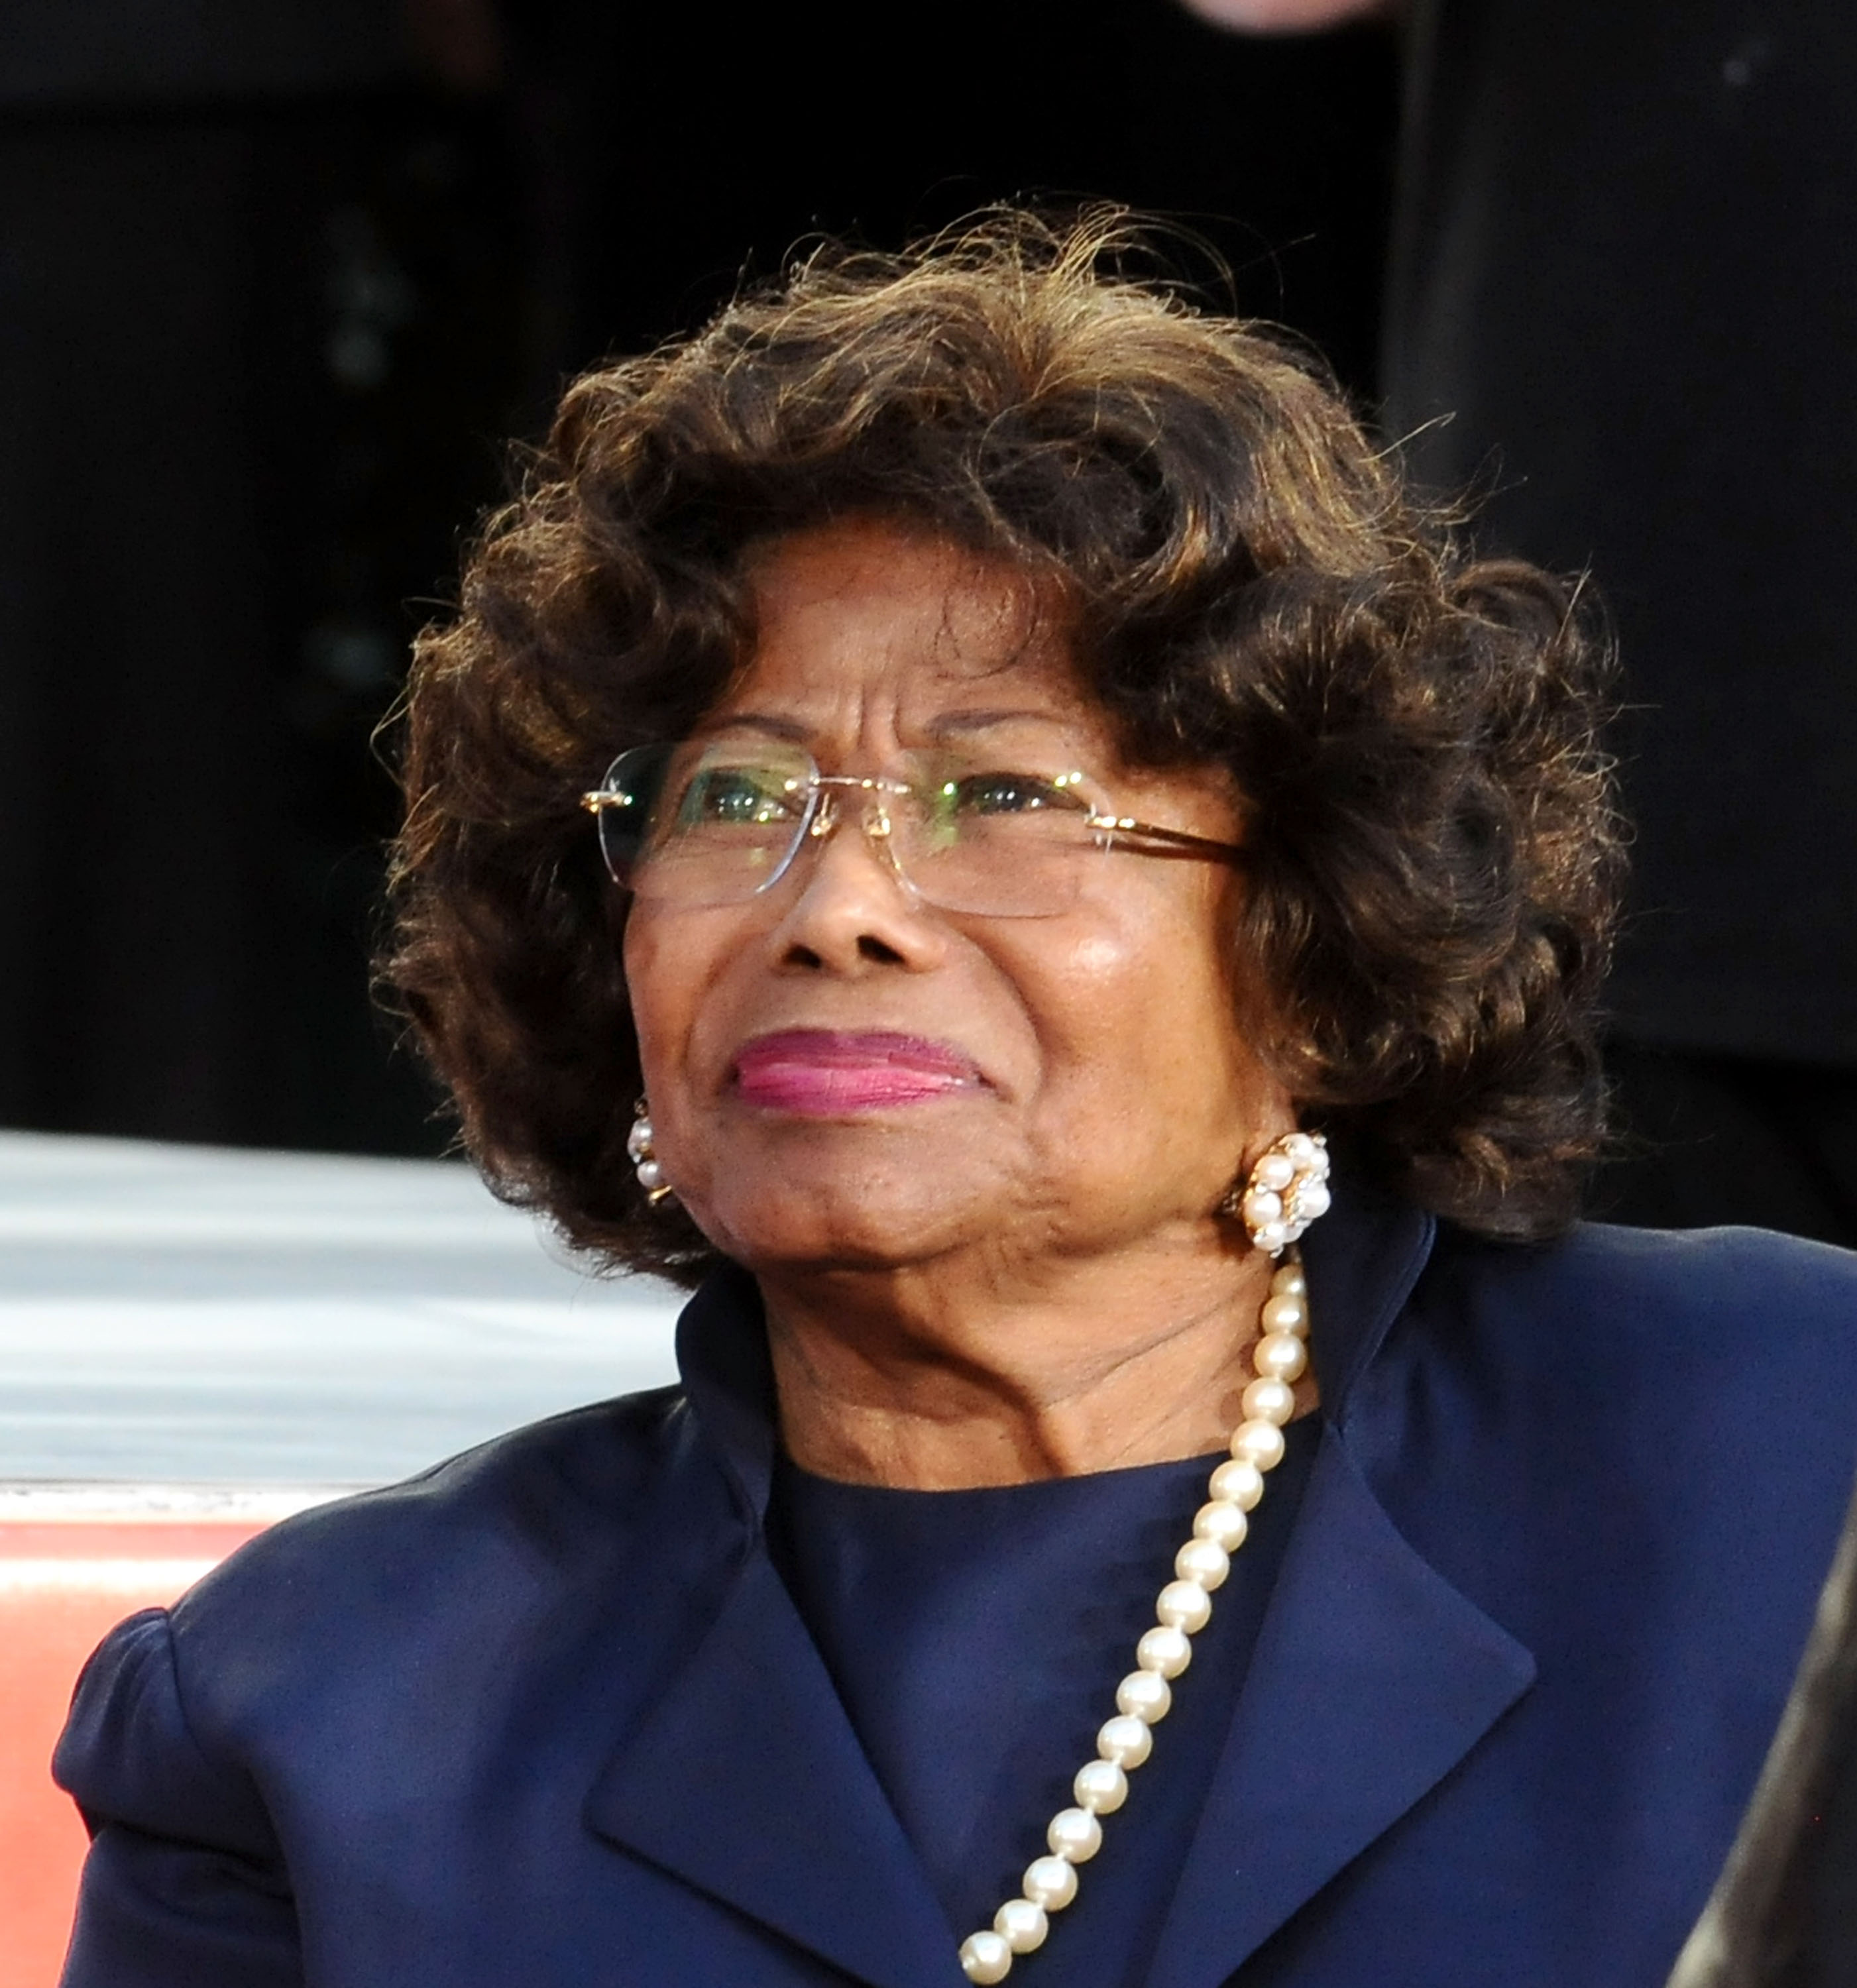 Katherine Jackson at the Michael Jackson Hand And Footprint Ceremony in Hollywood, California on January 26, 2012 | Source: Getty Images